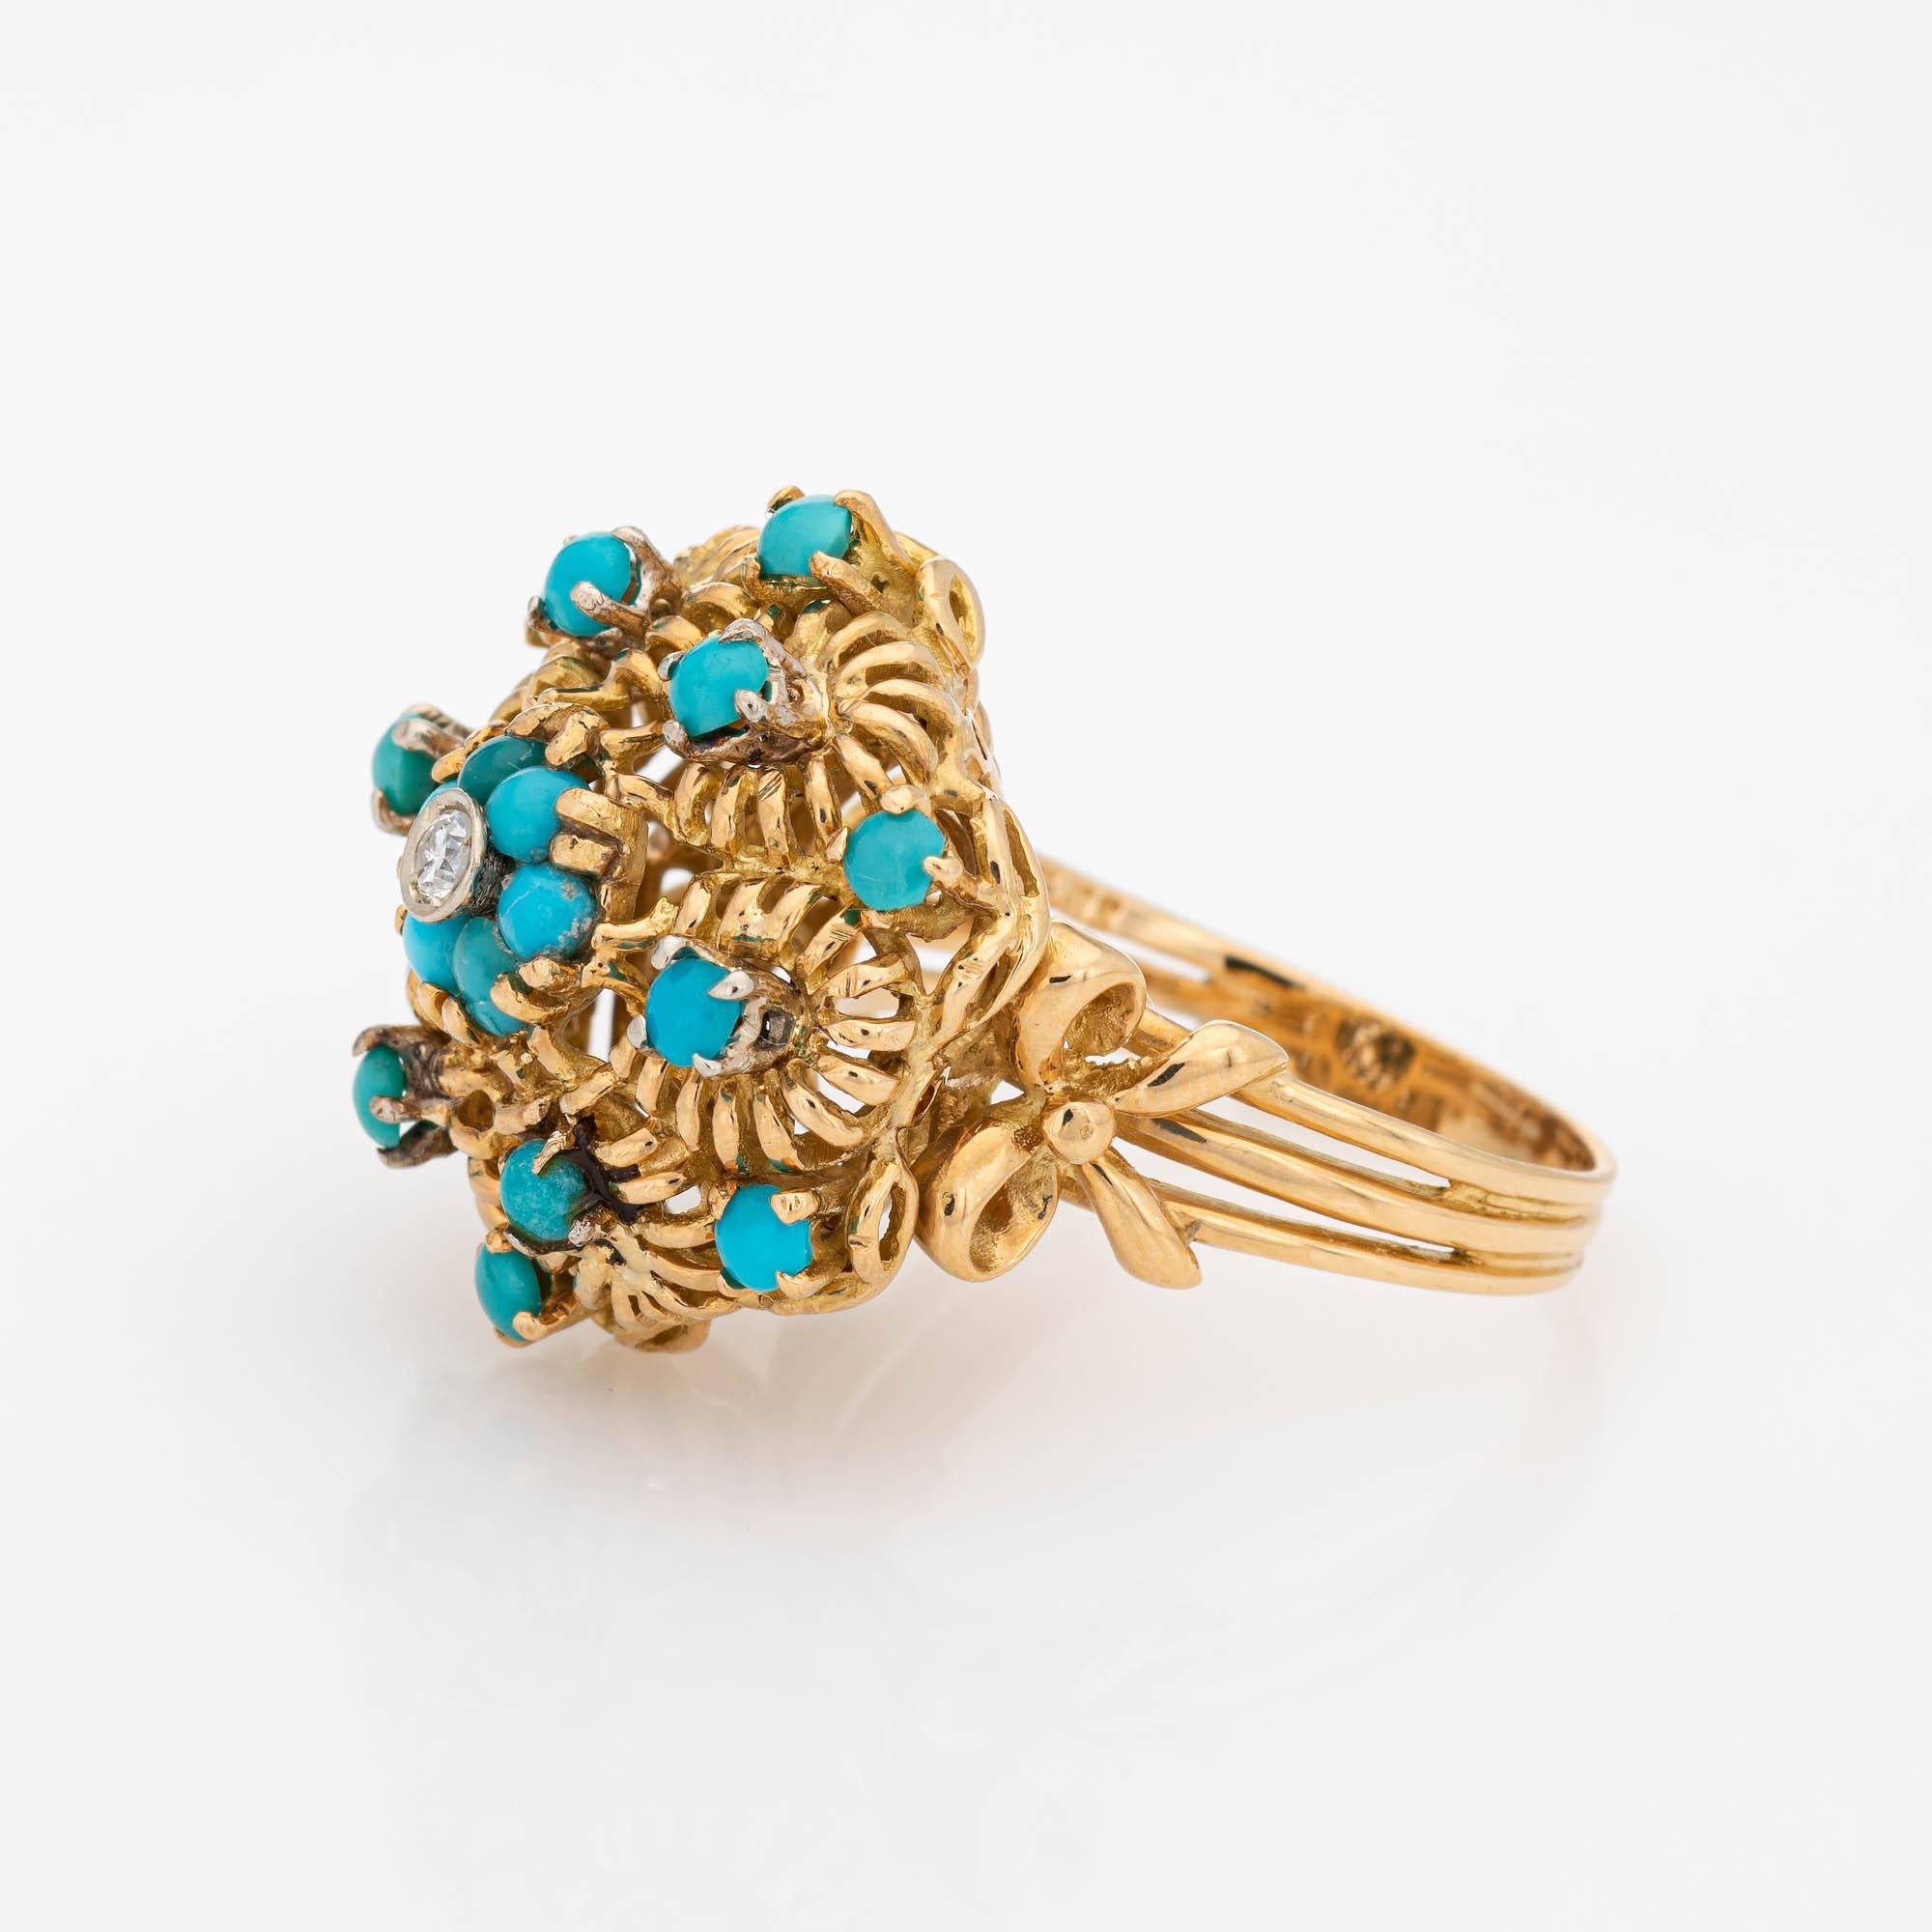 Round Cut Turquoise Diamond Cluster Ring Vintage 18 Karat Yellow Gold Large Dome Jewelry